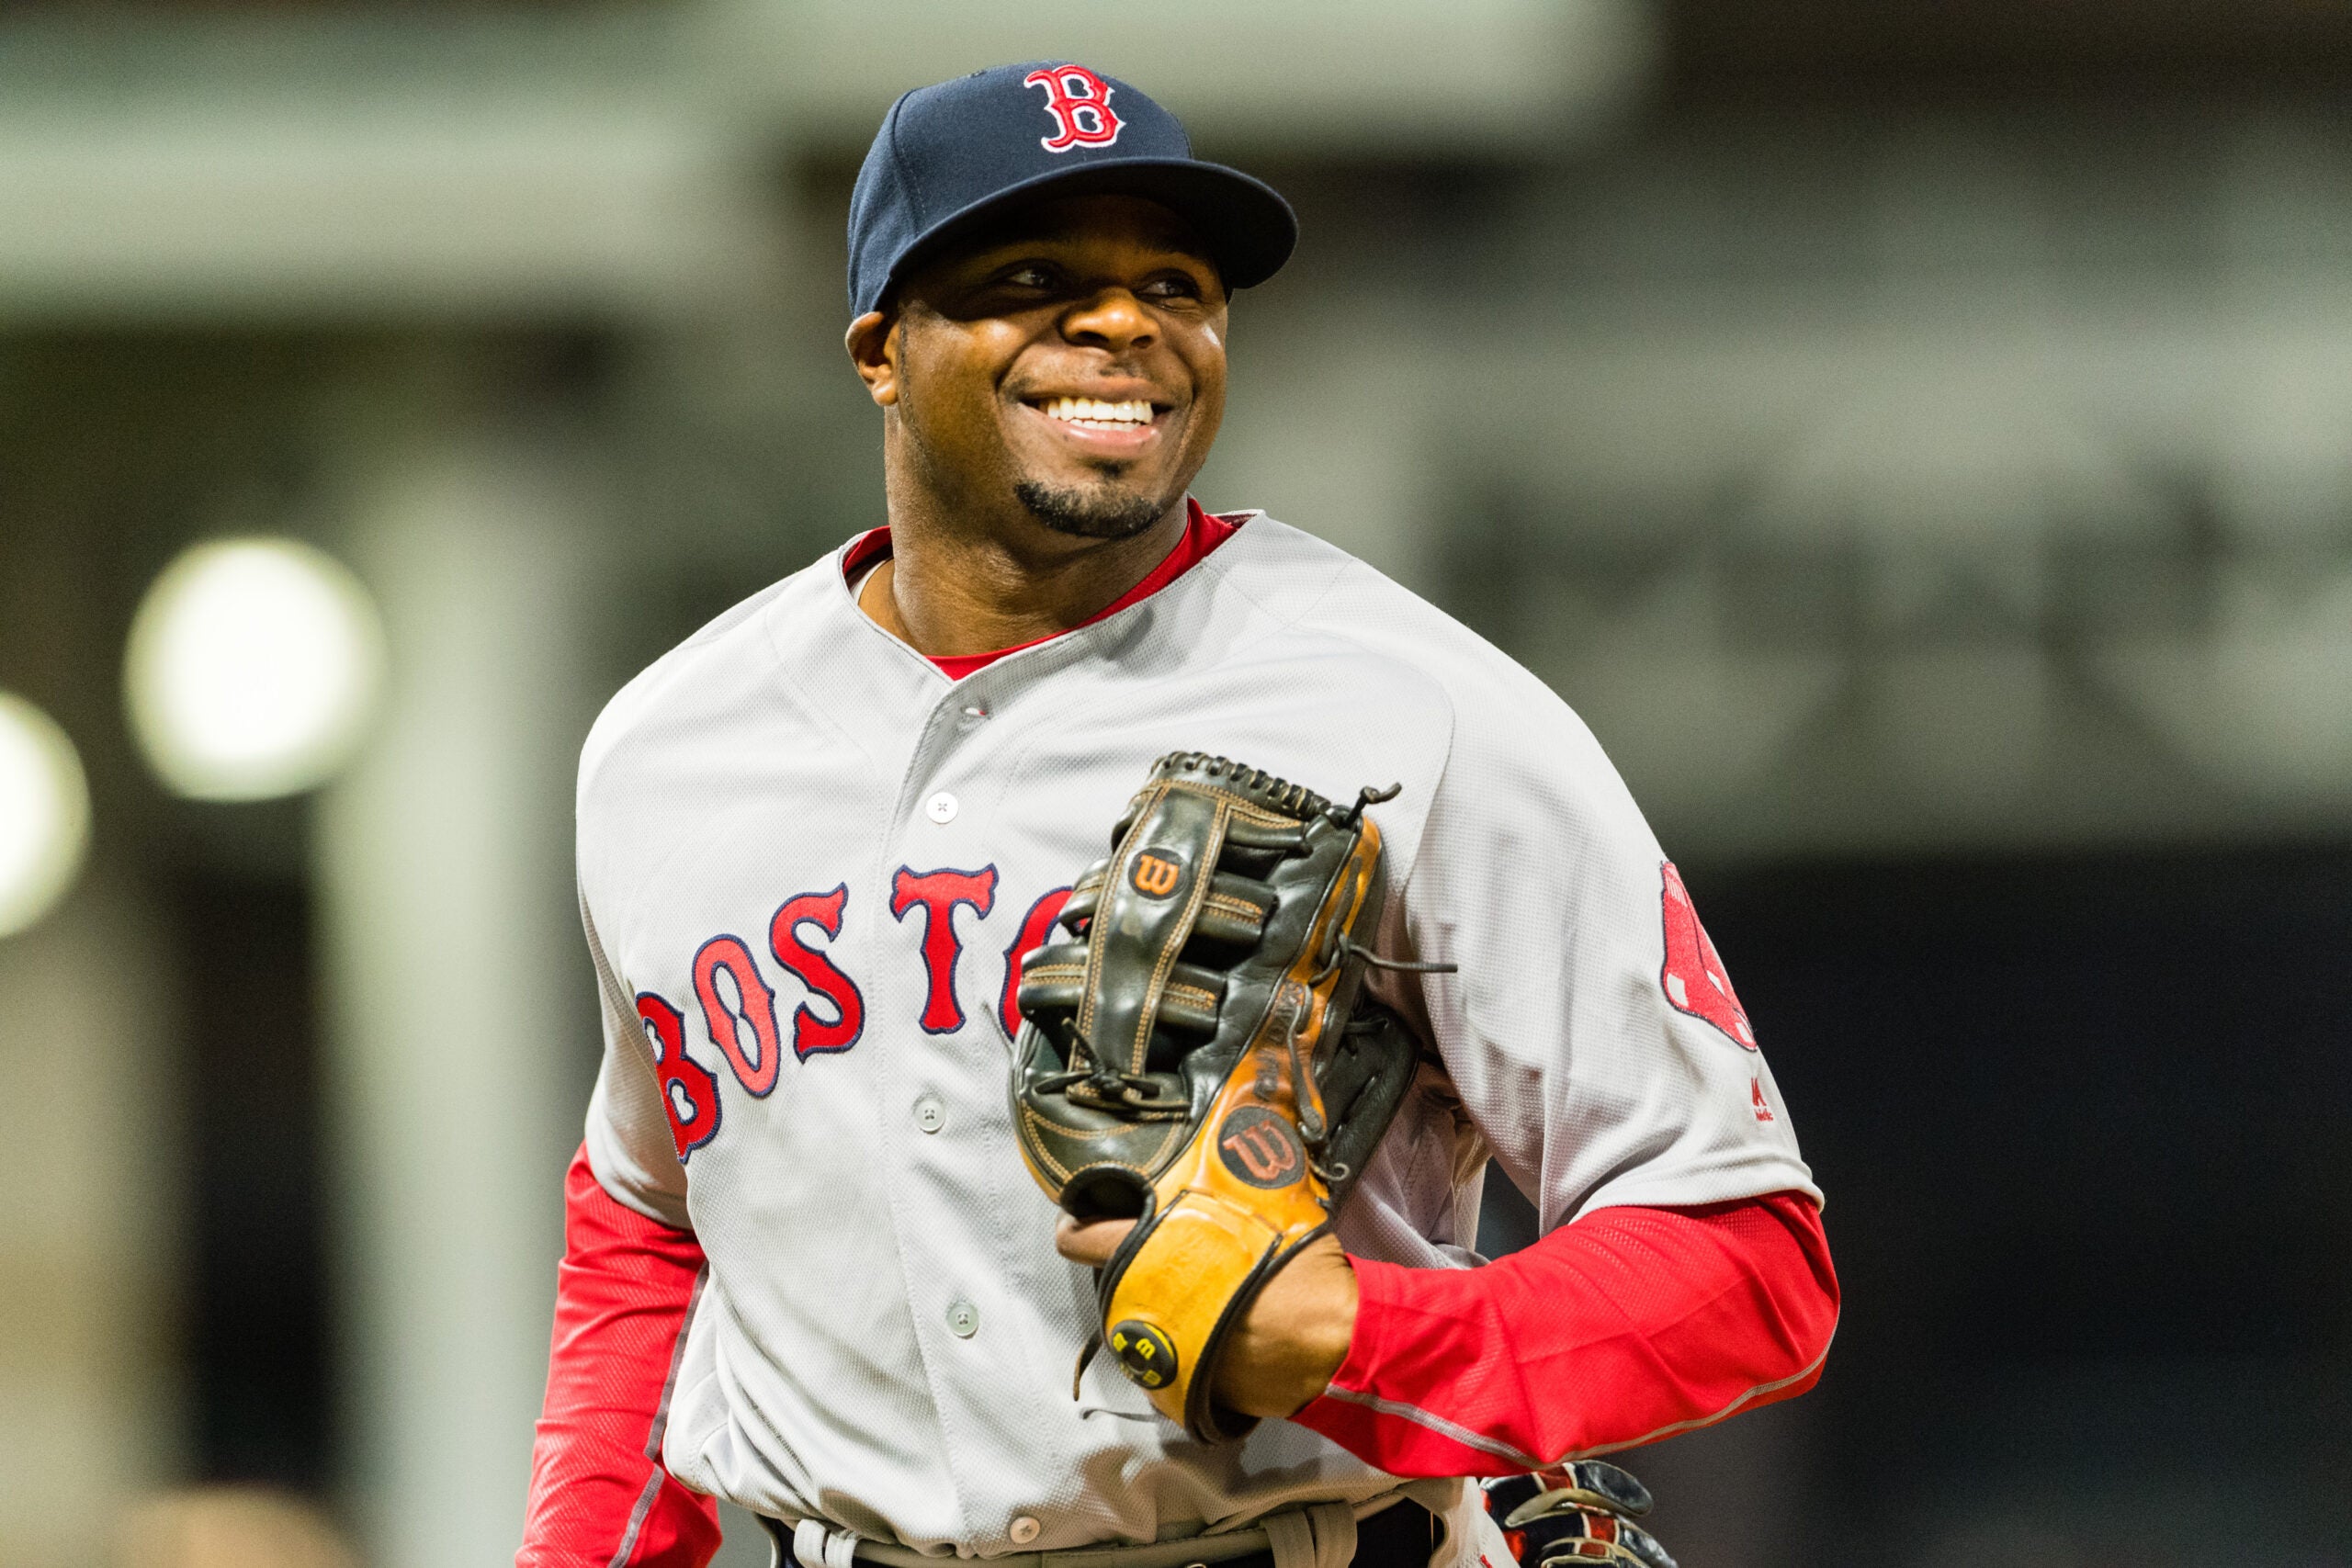 Rajai Davis looks for another postseason shot with Red Sox